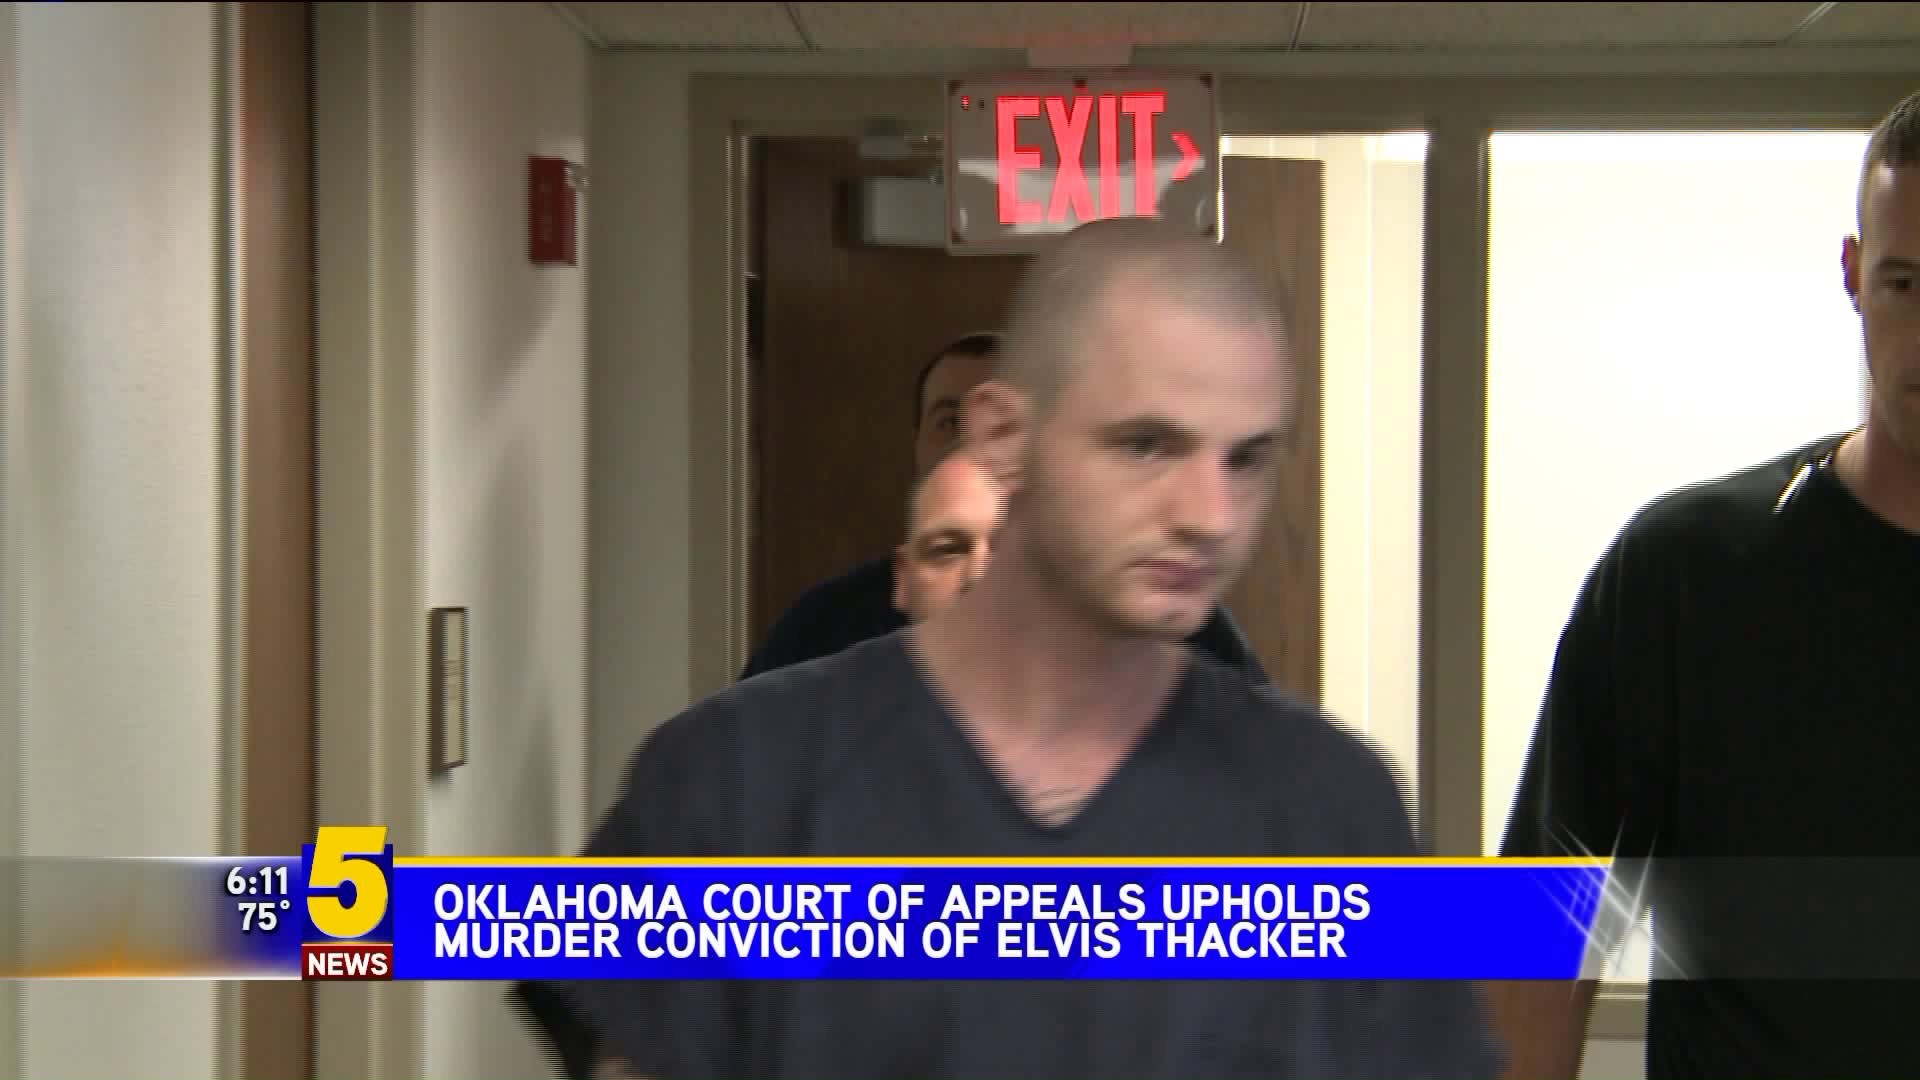 Oklahoma Court Of Appeals Upholds Murder Conviction Of Elvis Thacker